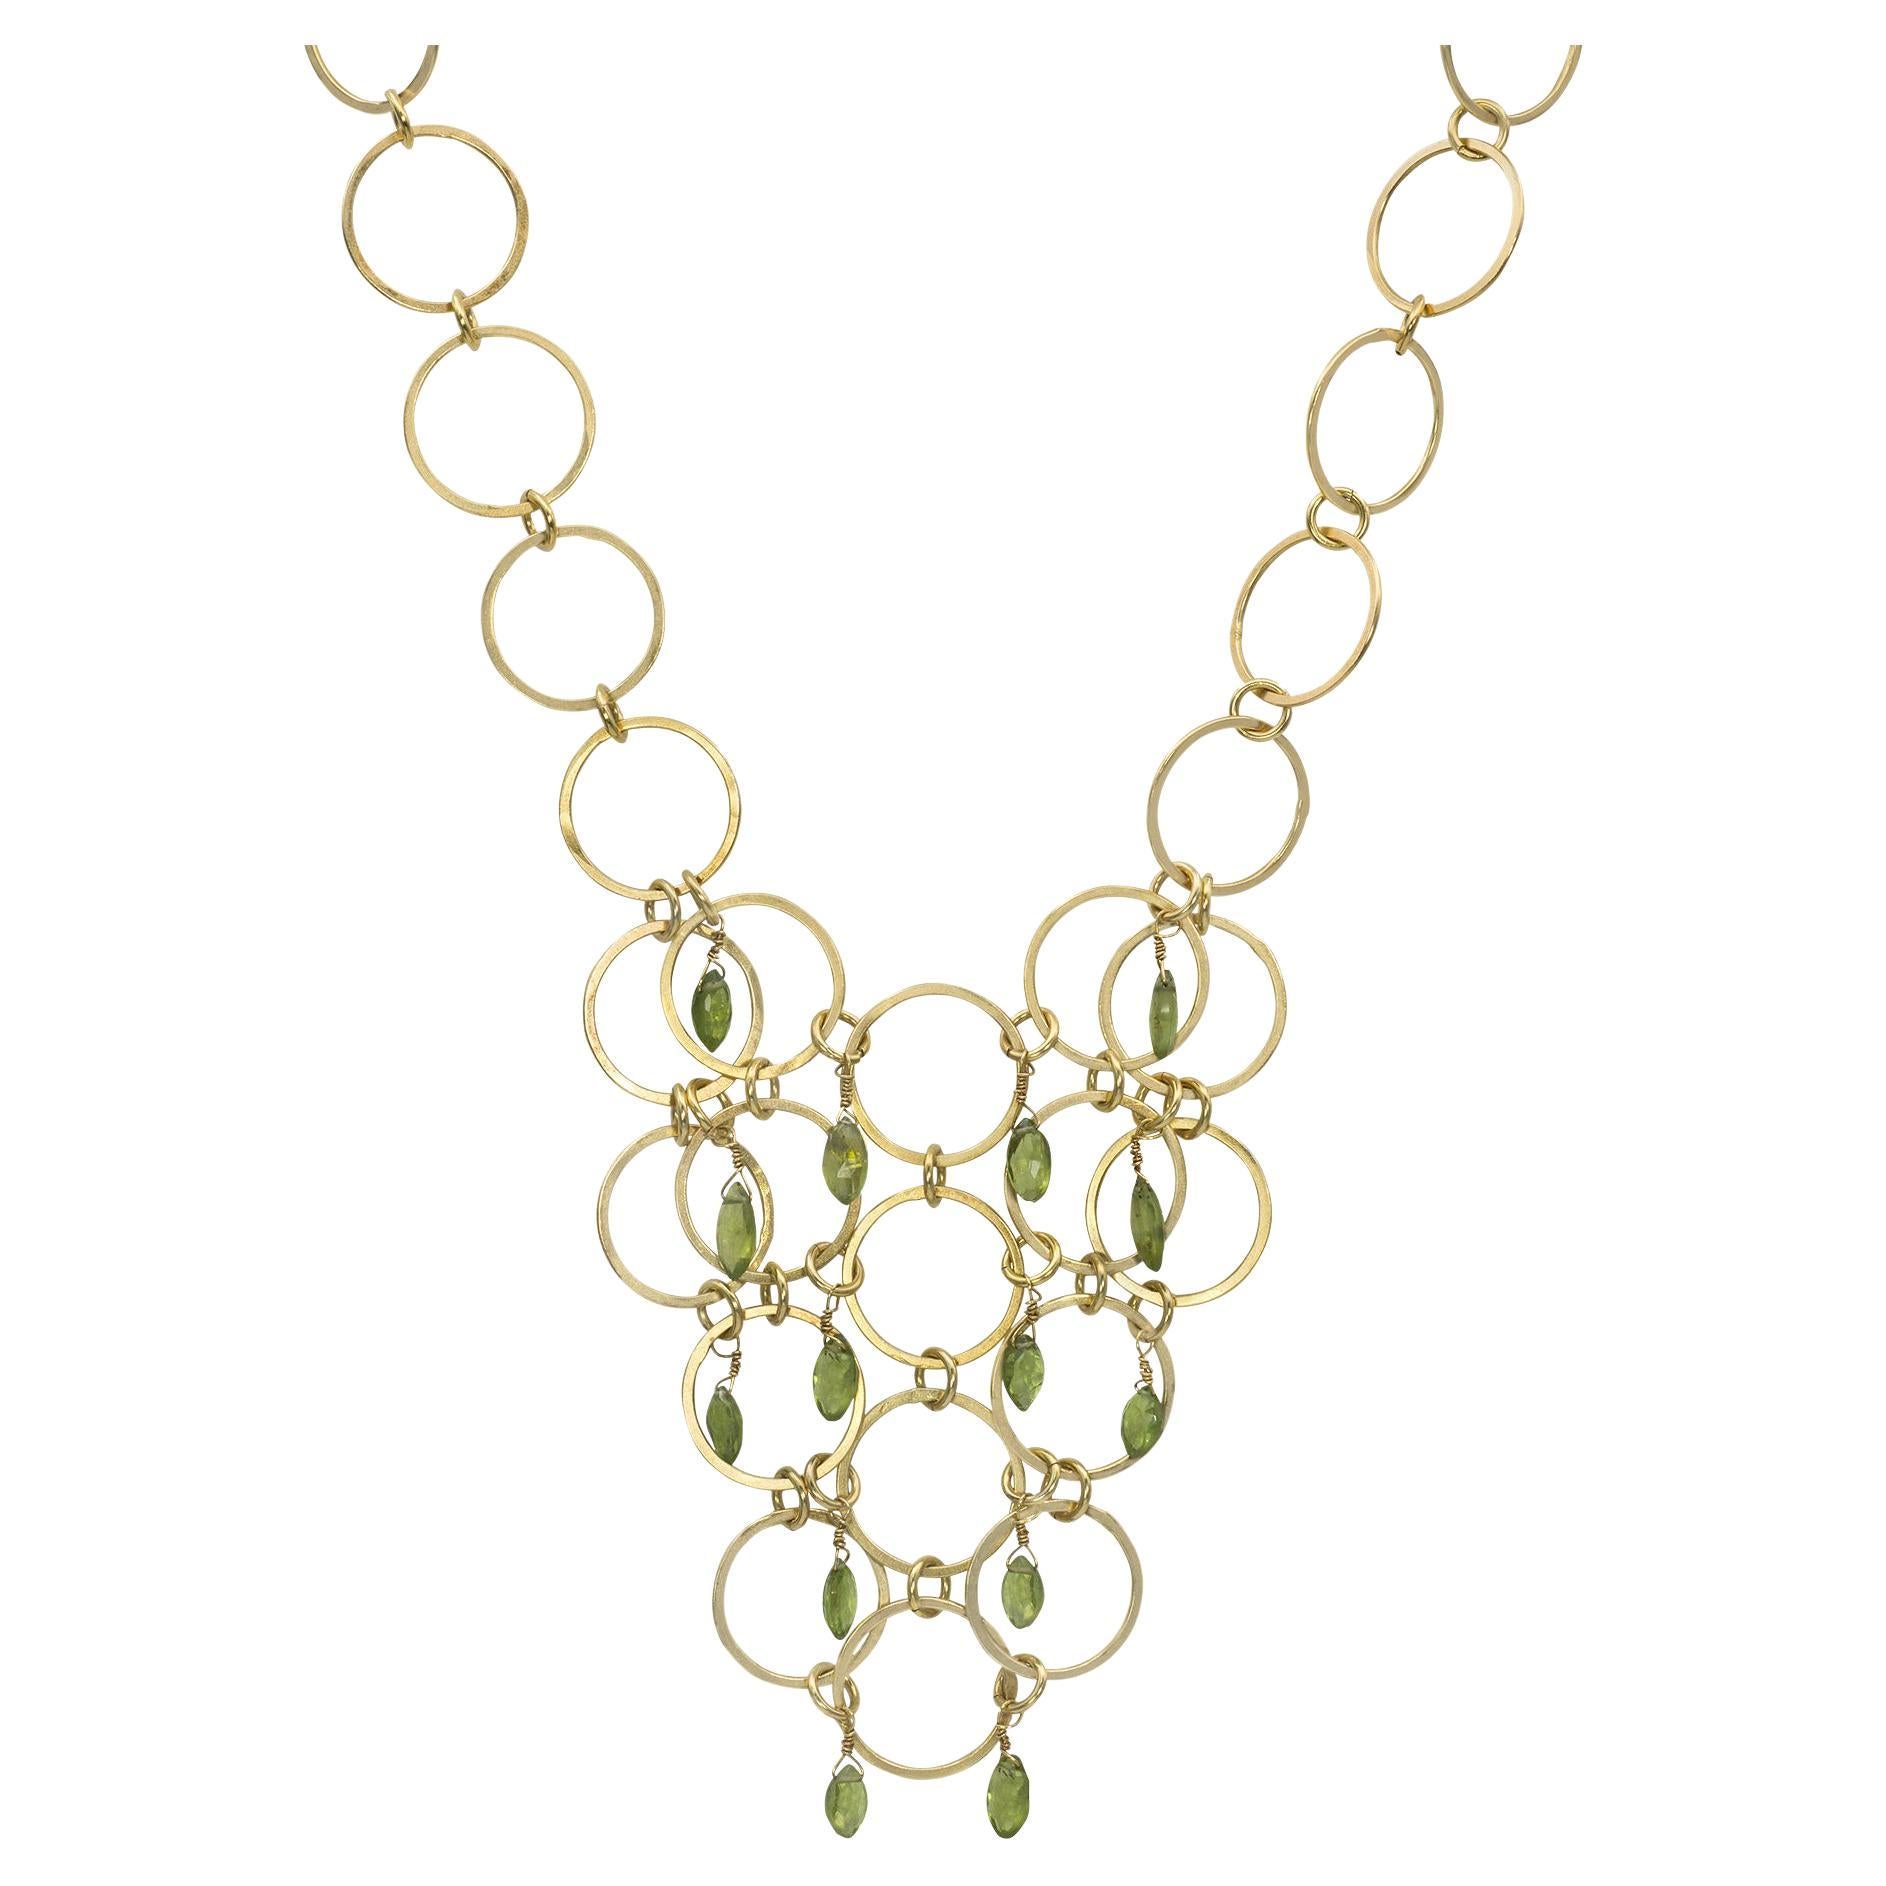 18k Gold Vermeil multi Hoop Bib Necklace with Peridot Stones For Sale